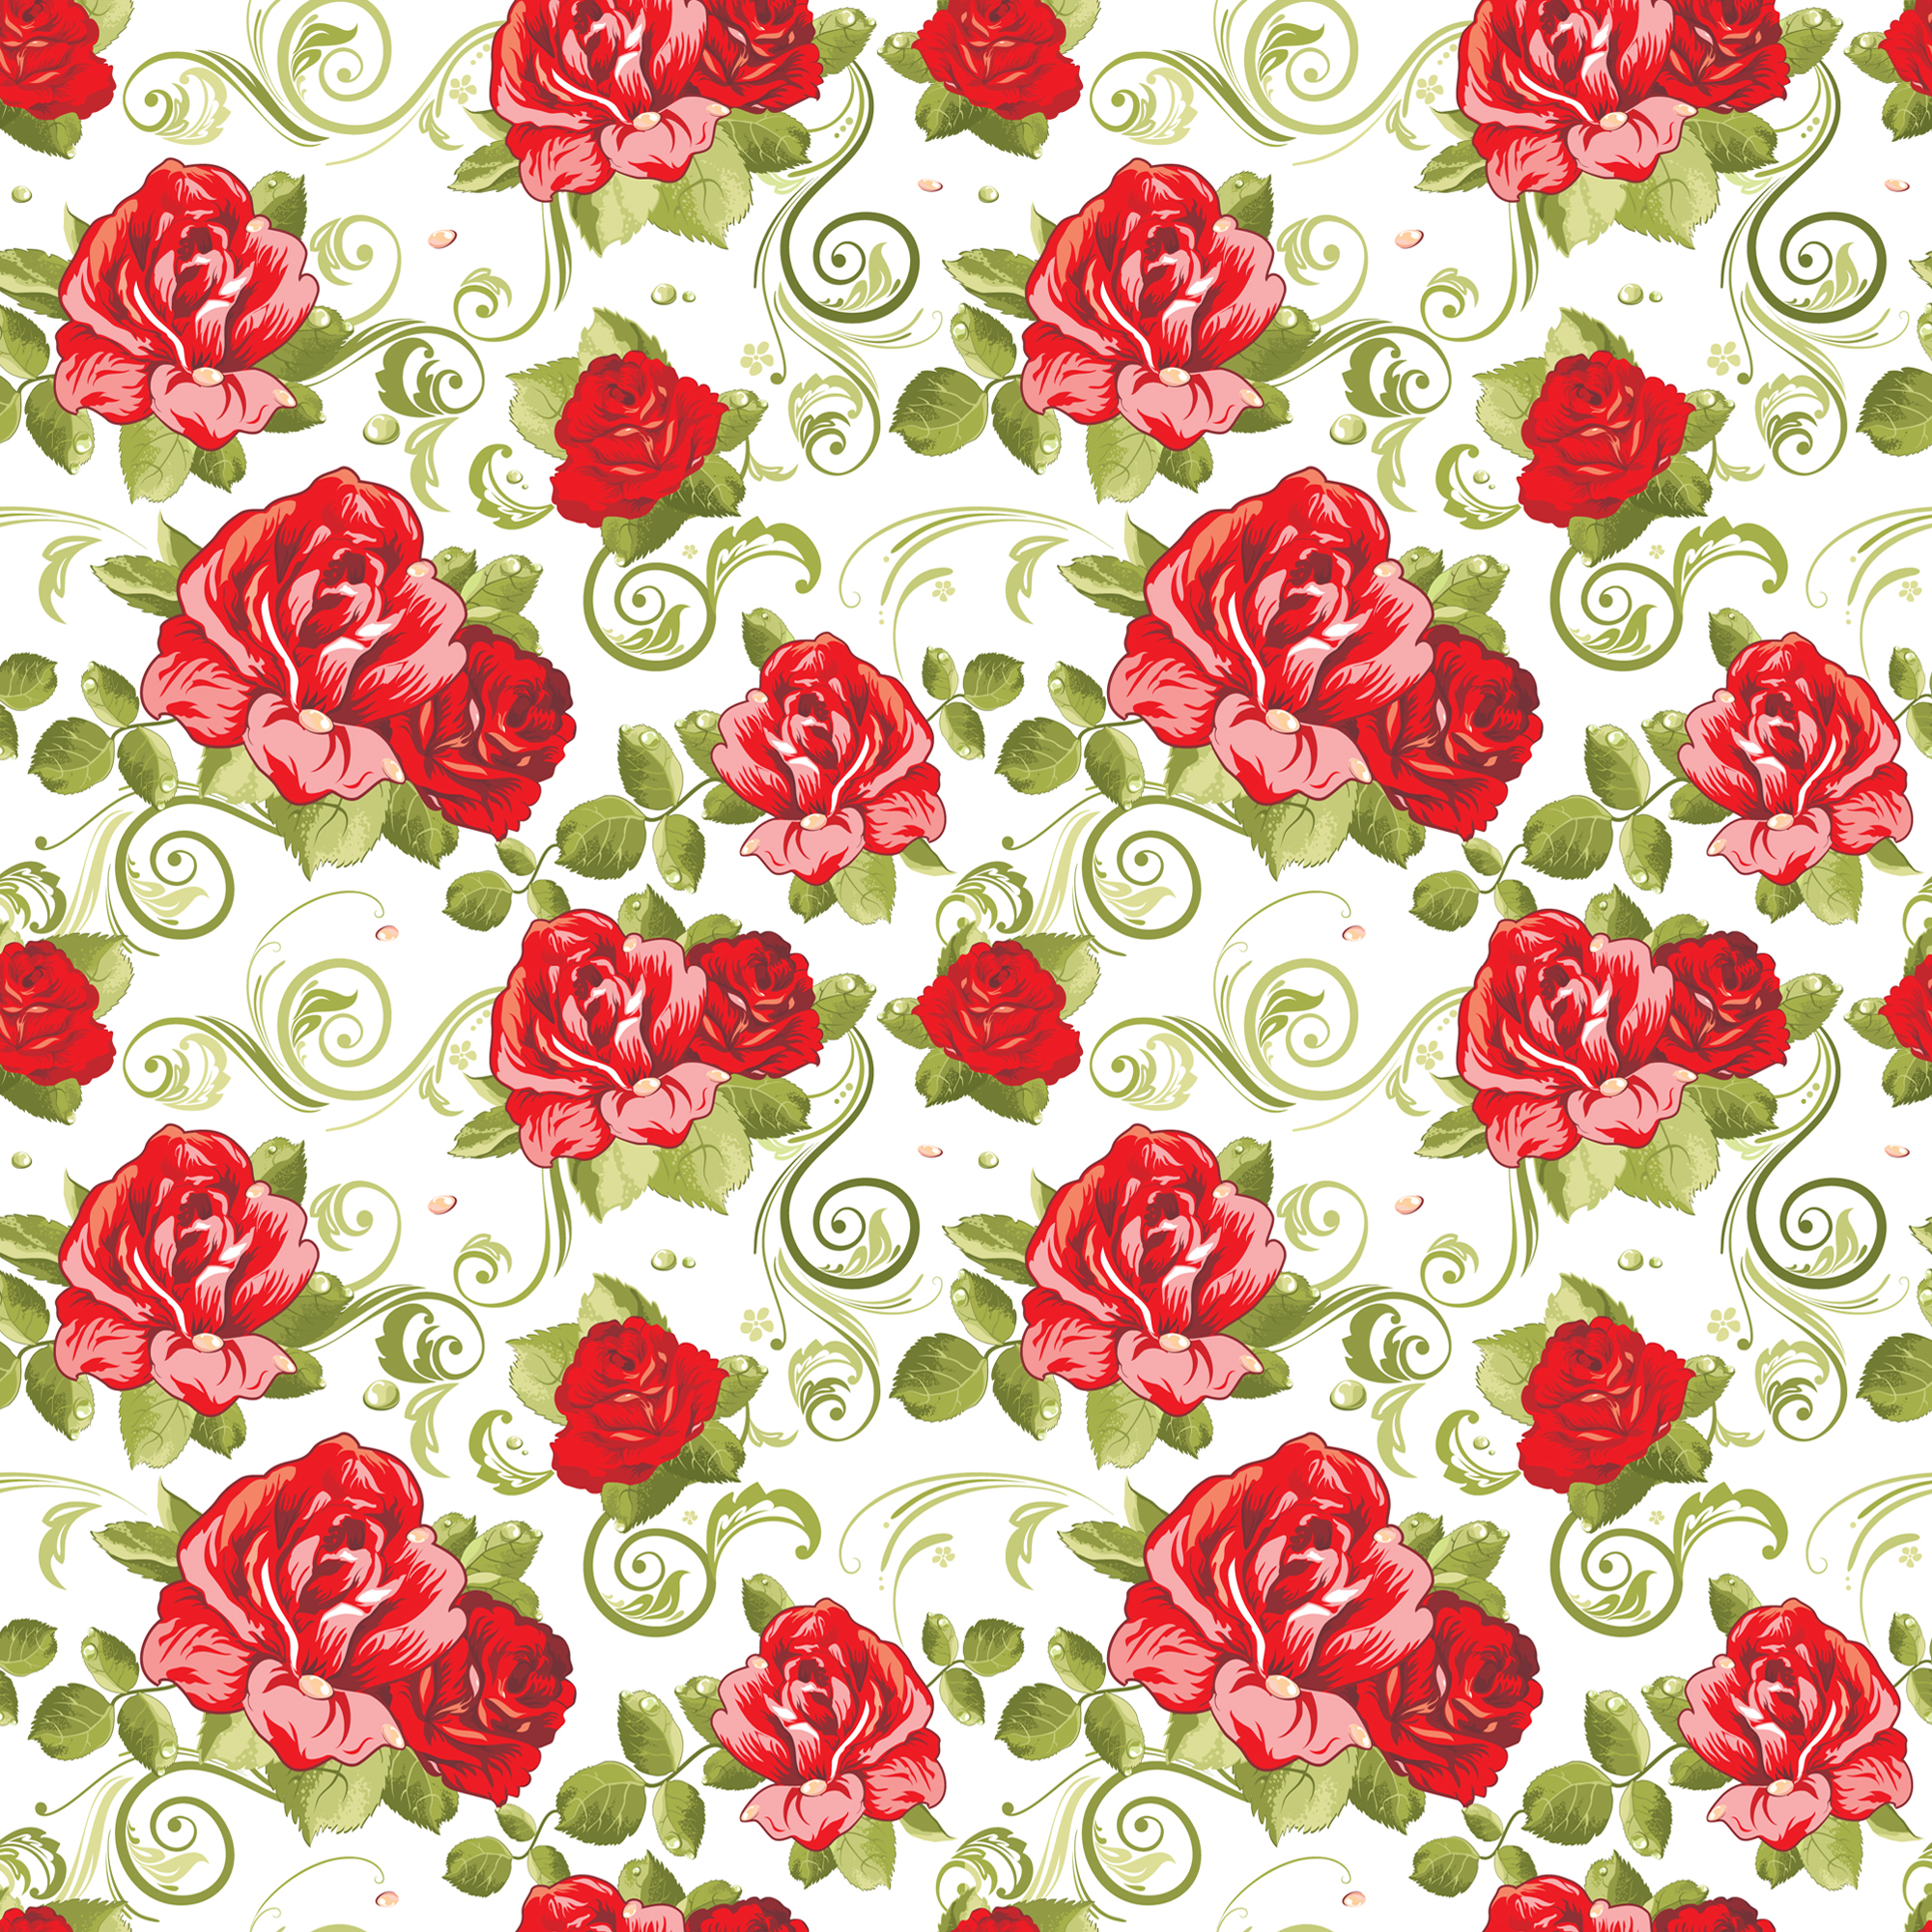 background, pictures, roses, flowers, patterns High Definition image